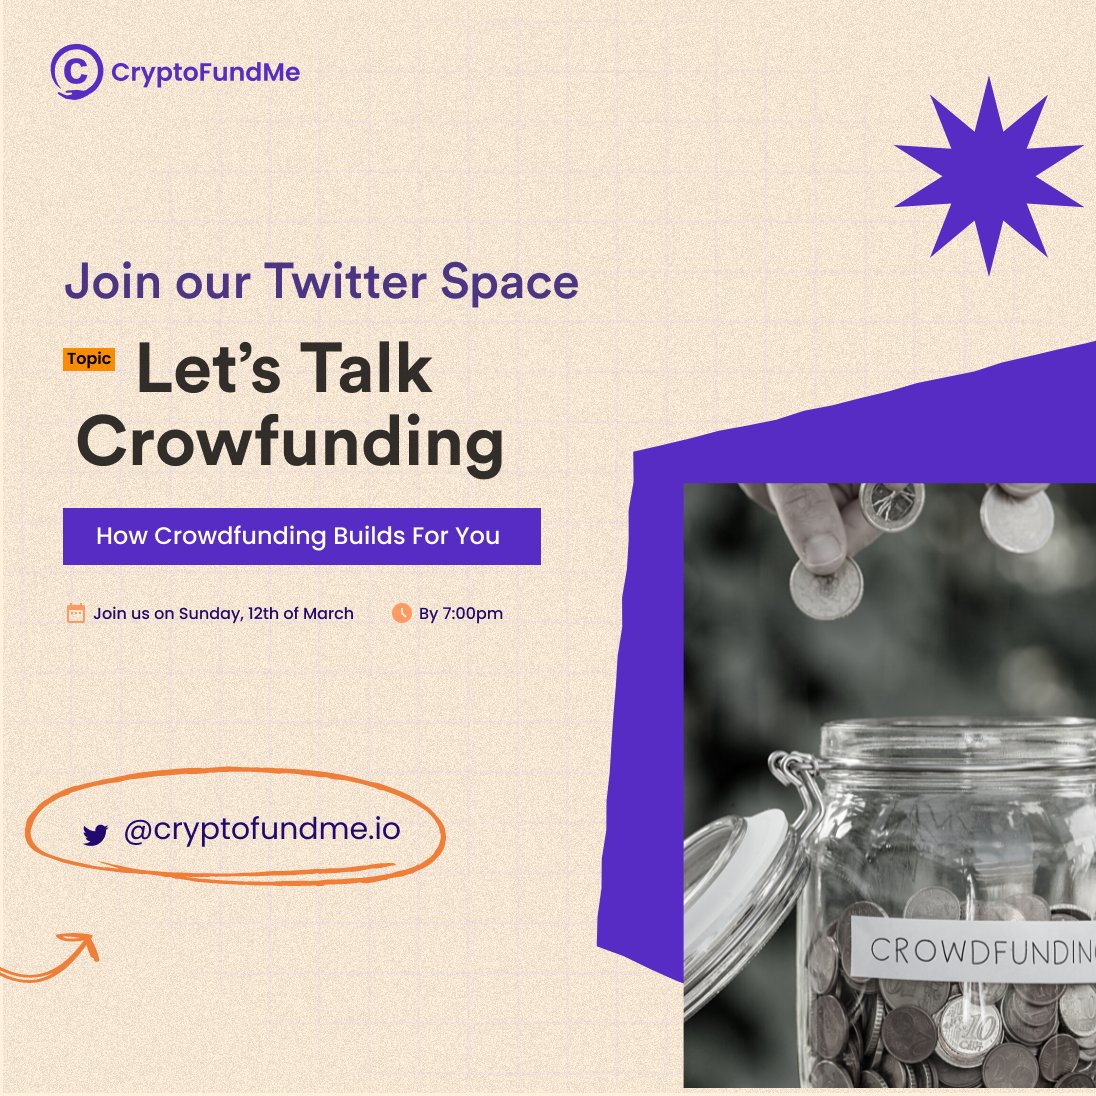 Join us on March 12th at 7pm on Twitter Space for an engaging panel discussion all about crowdfunding! Learn how crowdfunding builds you and your business, the best ways to leverage it and how to ensure a successful campaign. Don't miss out on this opportunity #Crowdfunding101